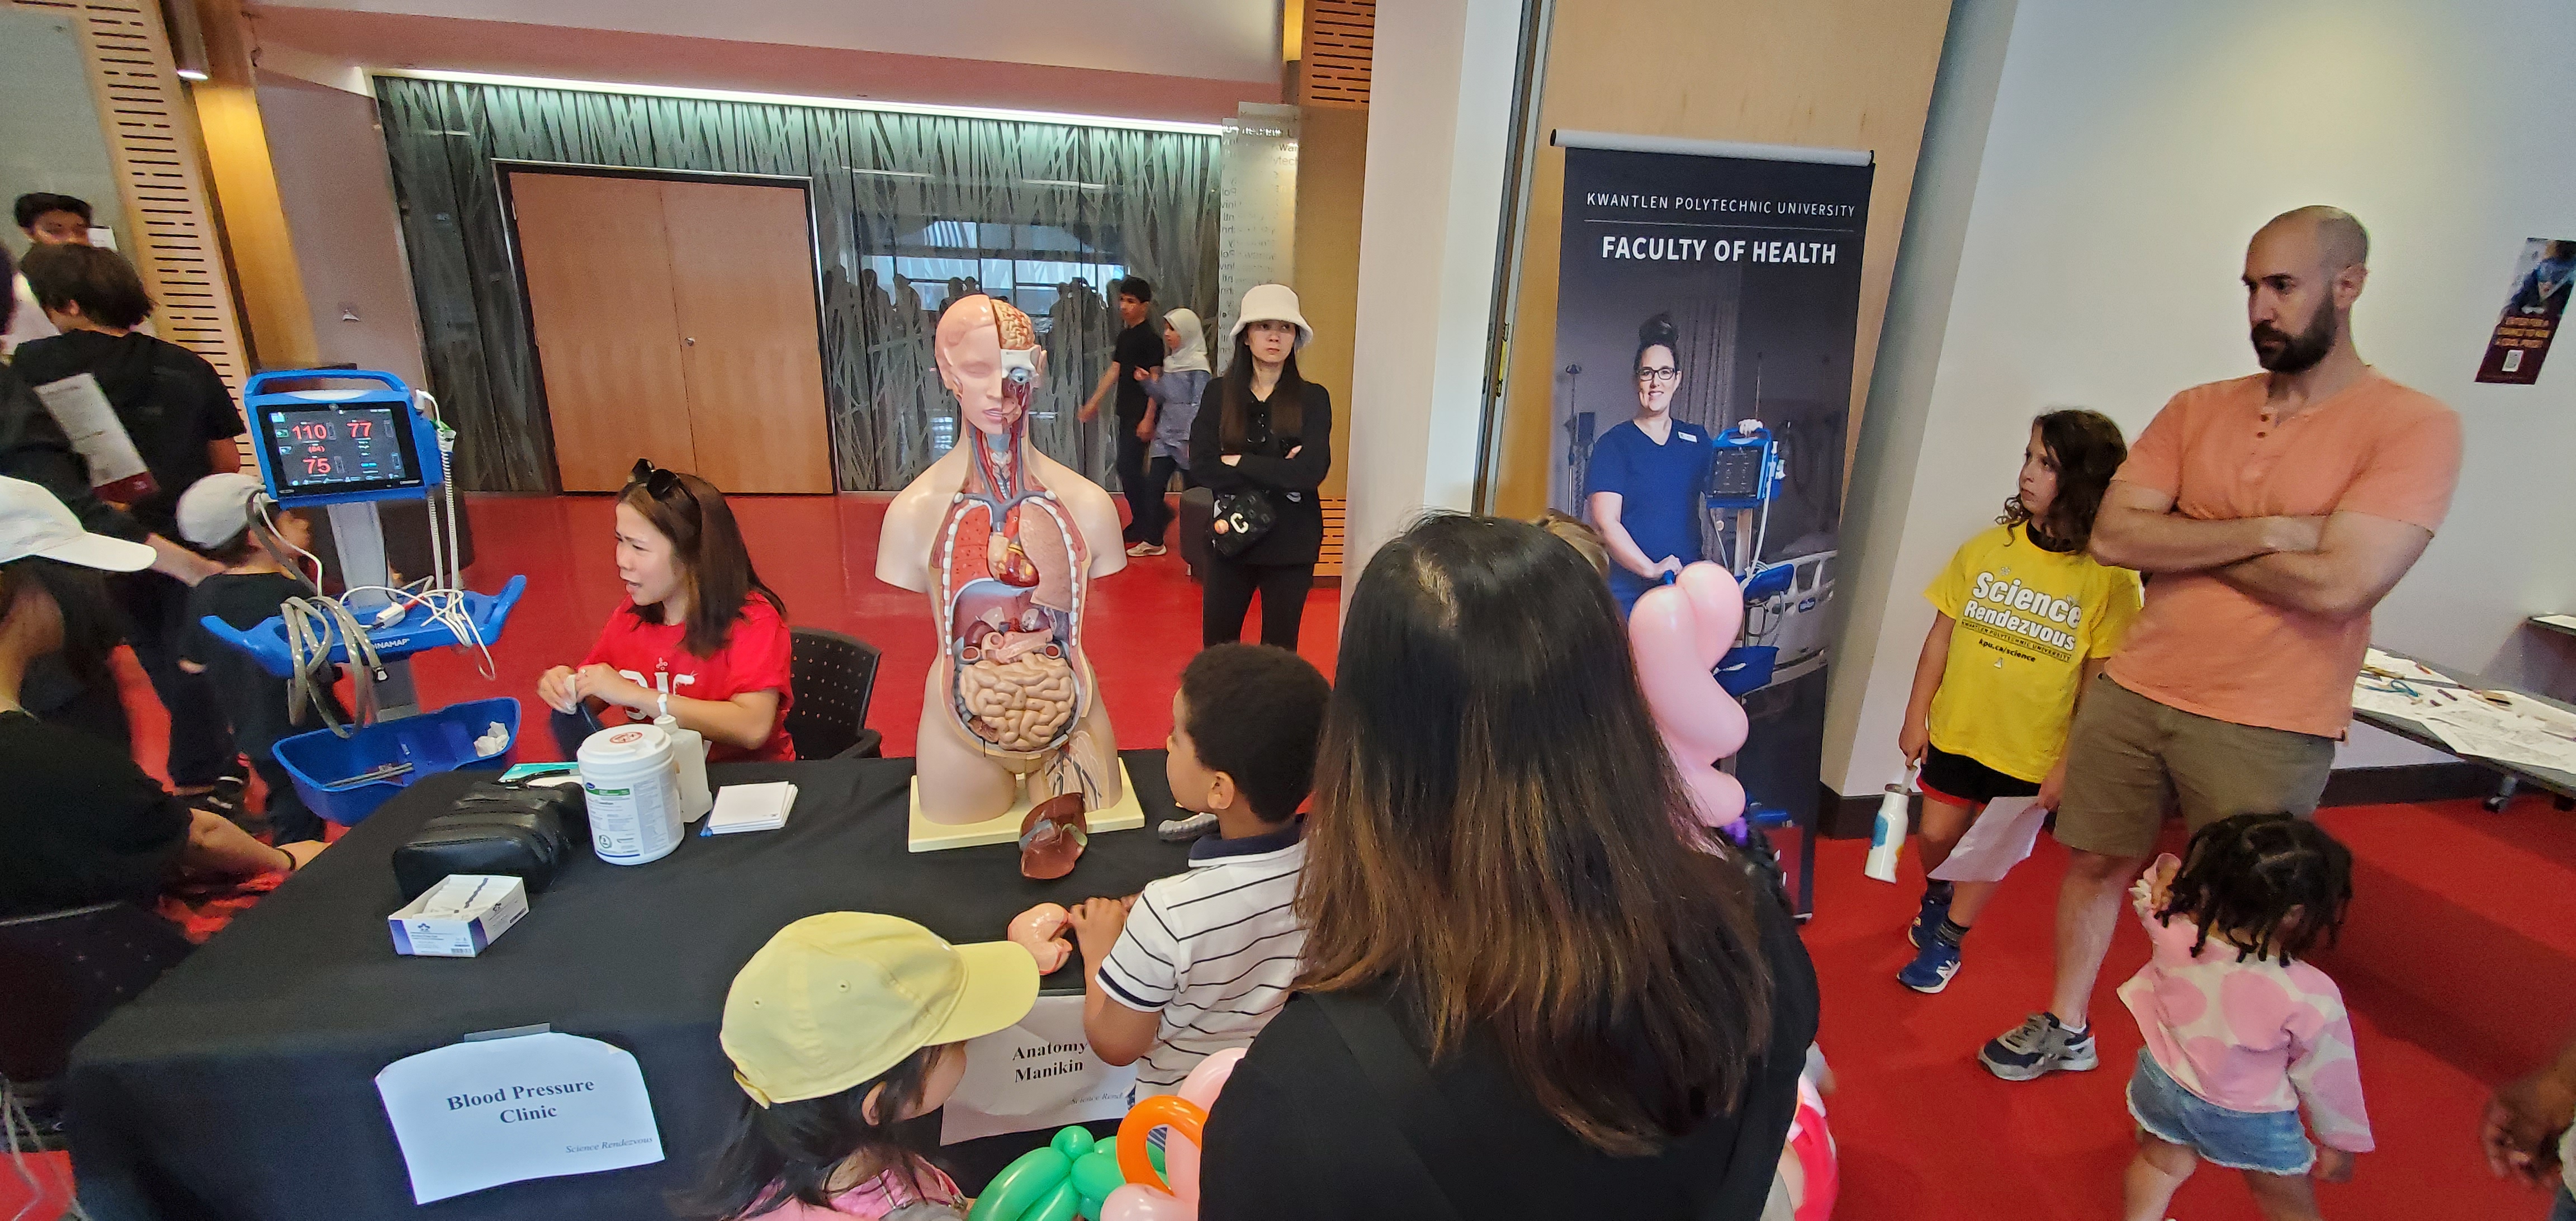 A Faculty of Health display including a blood pressure clinic and human anatomy manakin